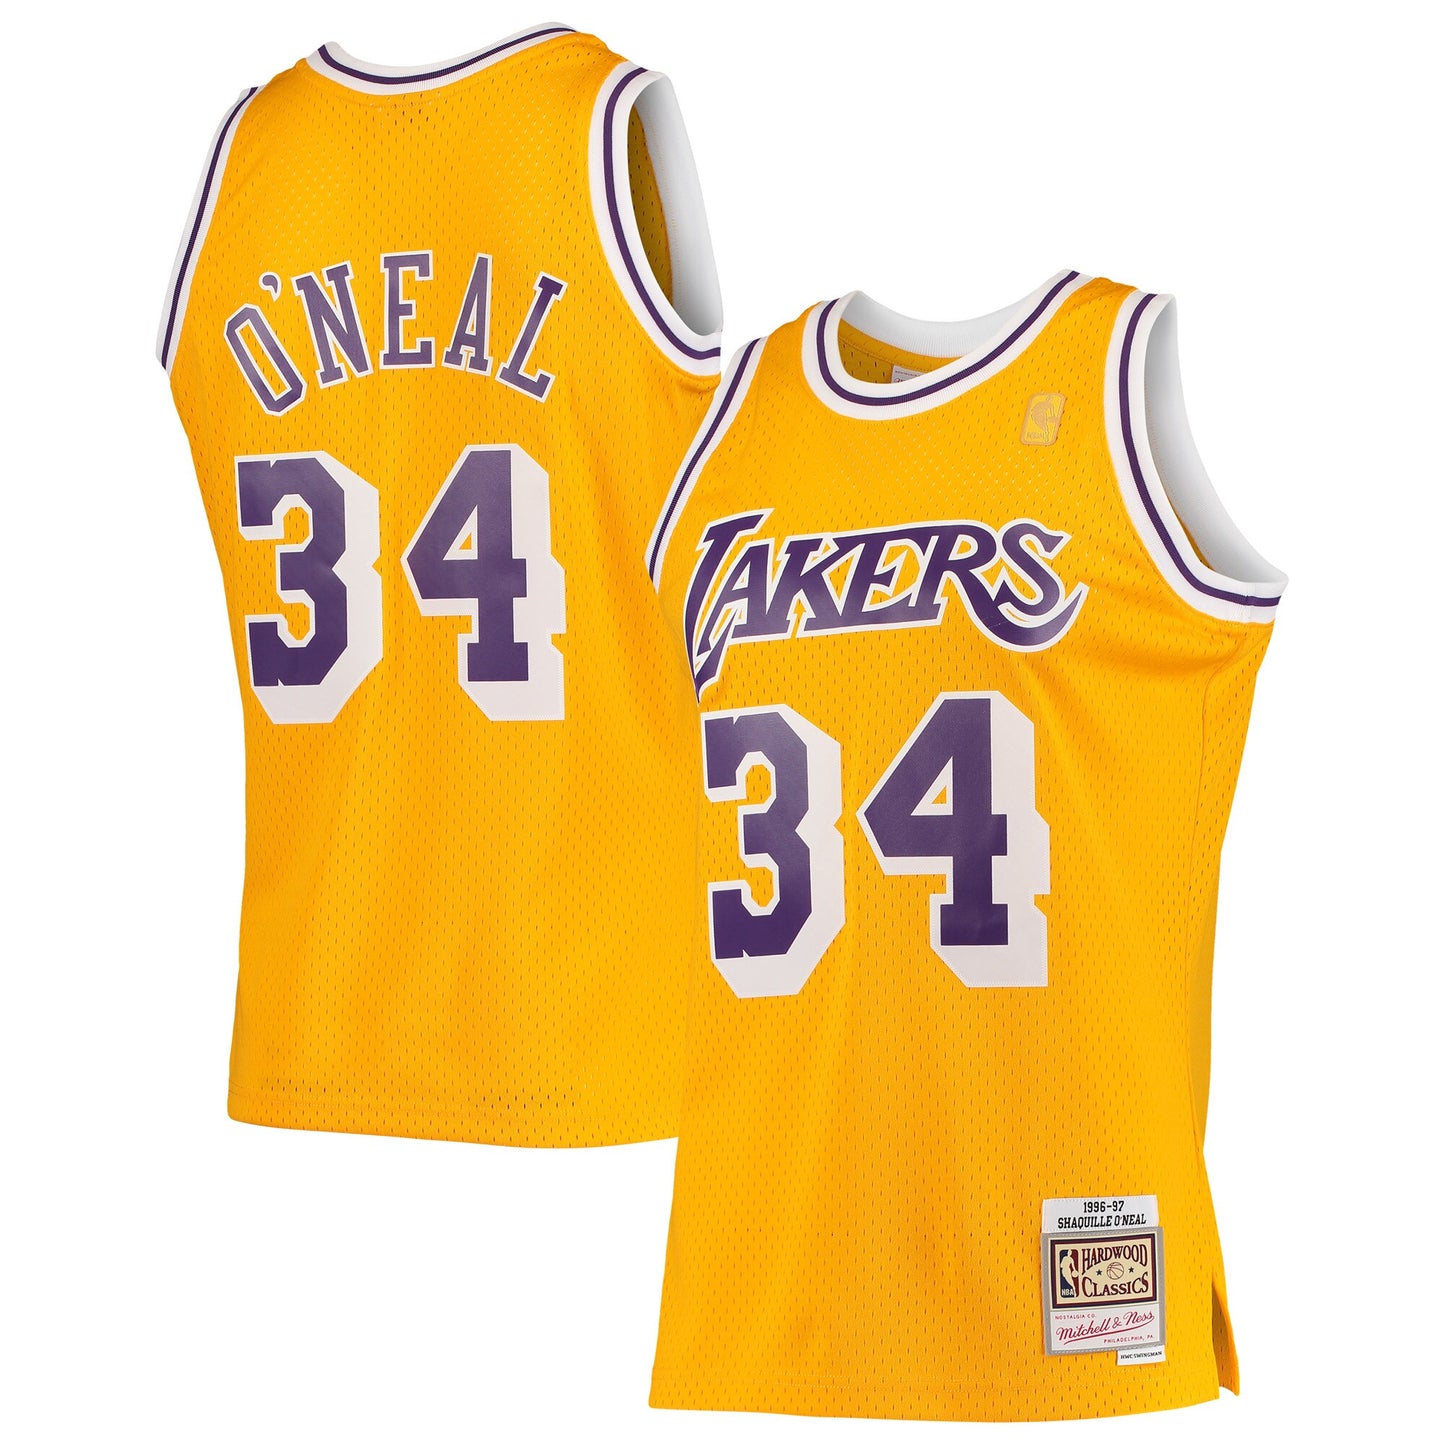 Shaquille O'Neal Los Angeles Lakers Mitchell & Ness Hardwood Classics Swingman Jersey - Gold